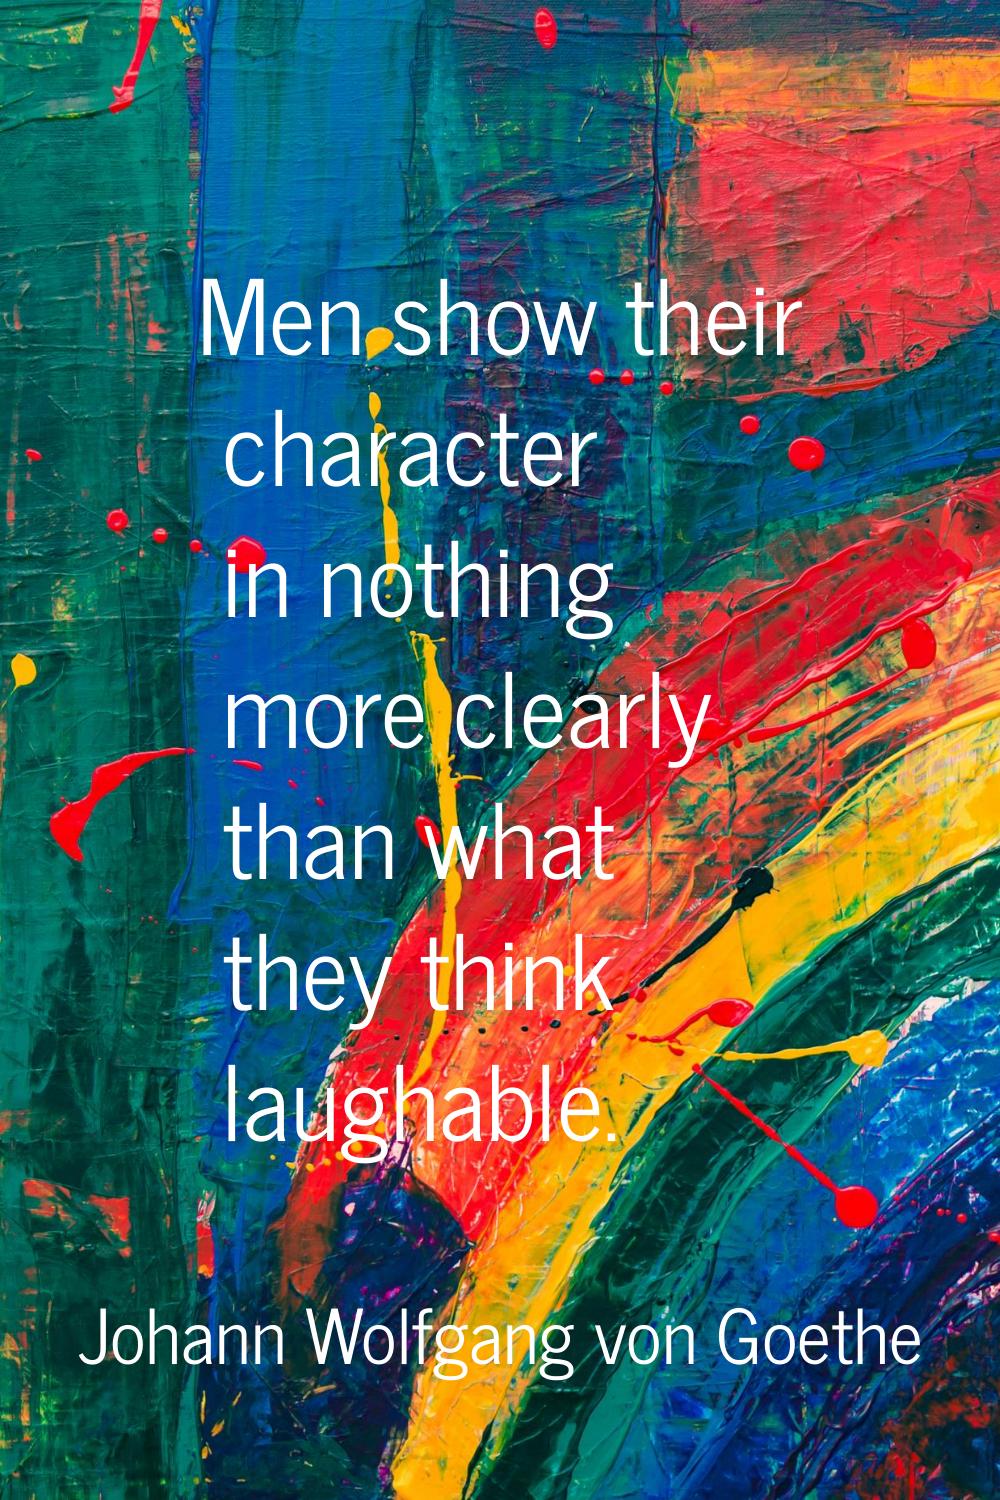 Men show their character in nothing more clearly than what they think laughable.